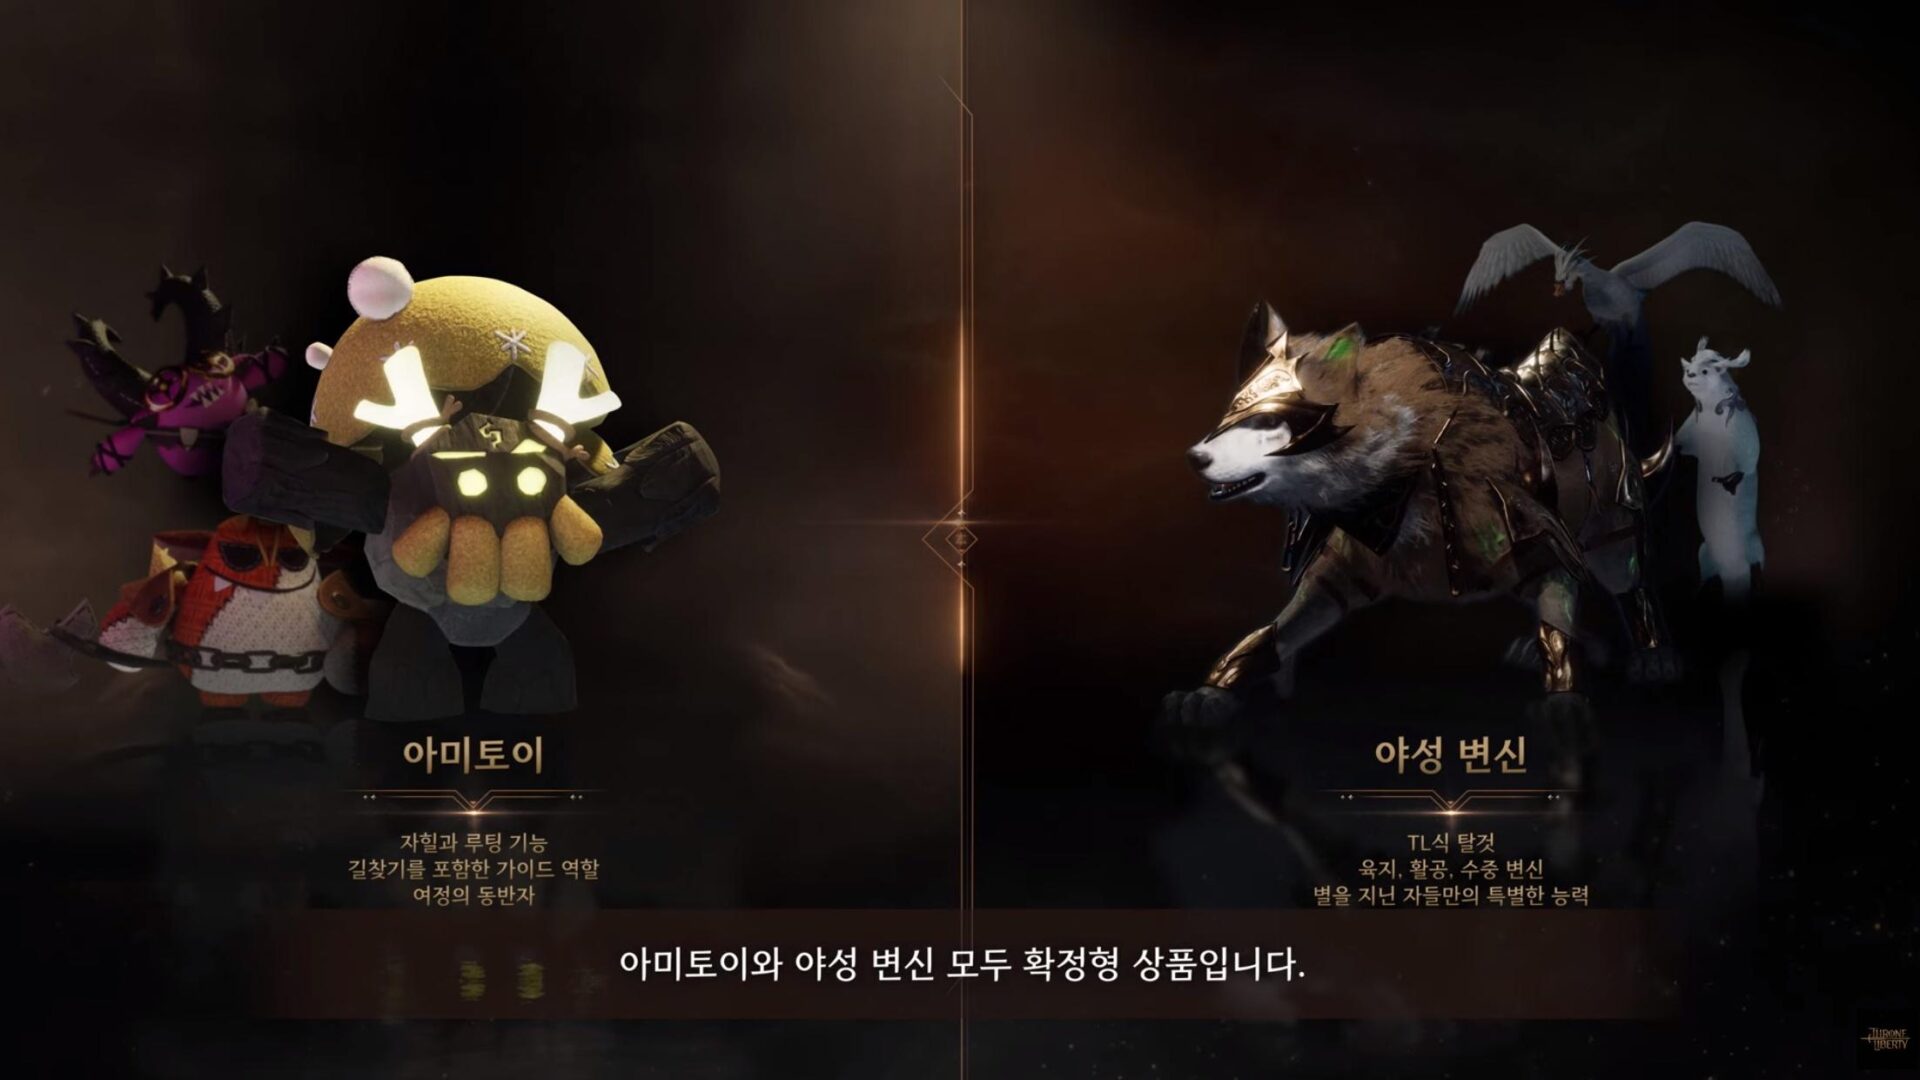 Throne and Liberty is Set to Launch in Korea this December 2023